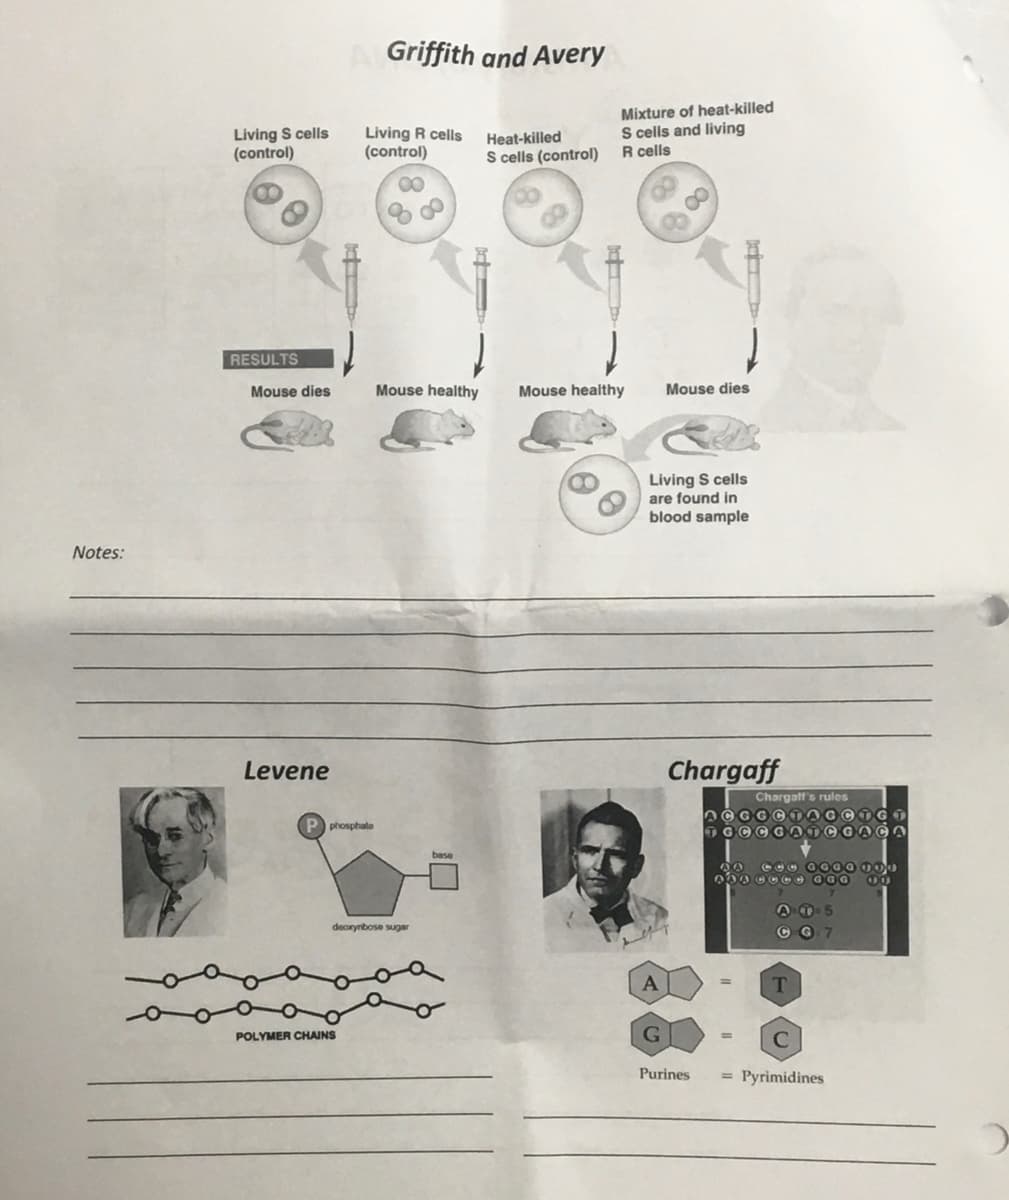 Griffith and Avery
Living S cells
(control)
Living R cells
(control)
Mixture of heat-killed
S cells and living
R cells
Heat-killed
S cells (control)
00
RESULTS
Mouse dies
Mouse healthy
Mouse healthy
Mouse dies
Living S cells
are found in
blood sample
Notes:
Levene
Chargaff
Chargatt's rules
P phosphate
A O- 5
deorynbose sugar
C G 7
A
T
POLYMER CHAINS
G
Purines
= Pyrimidines
